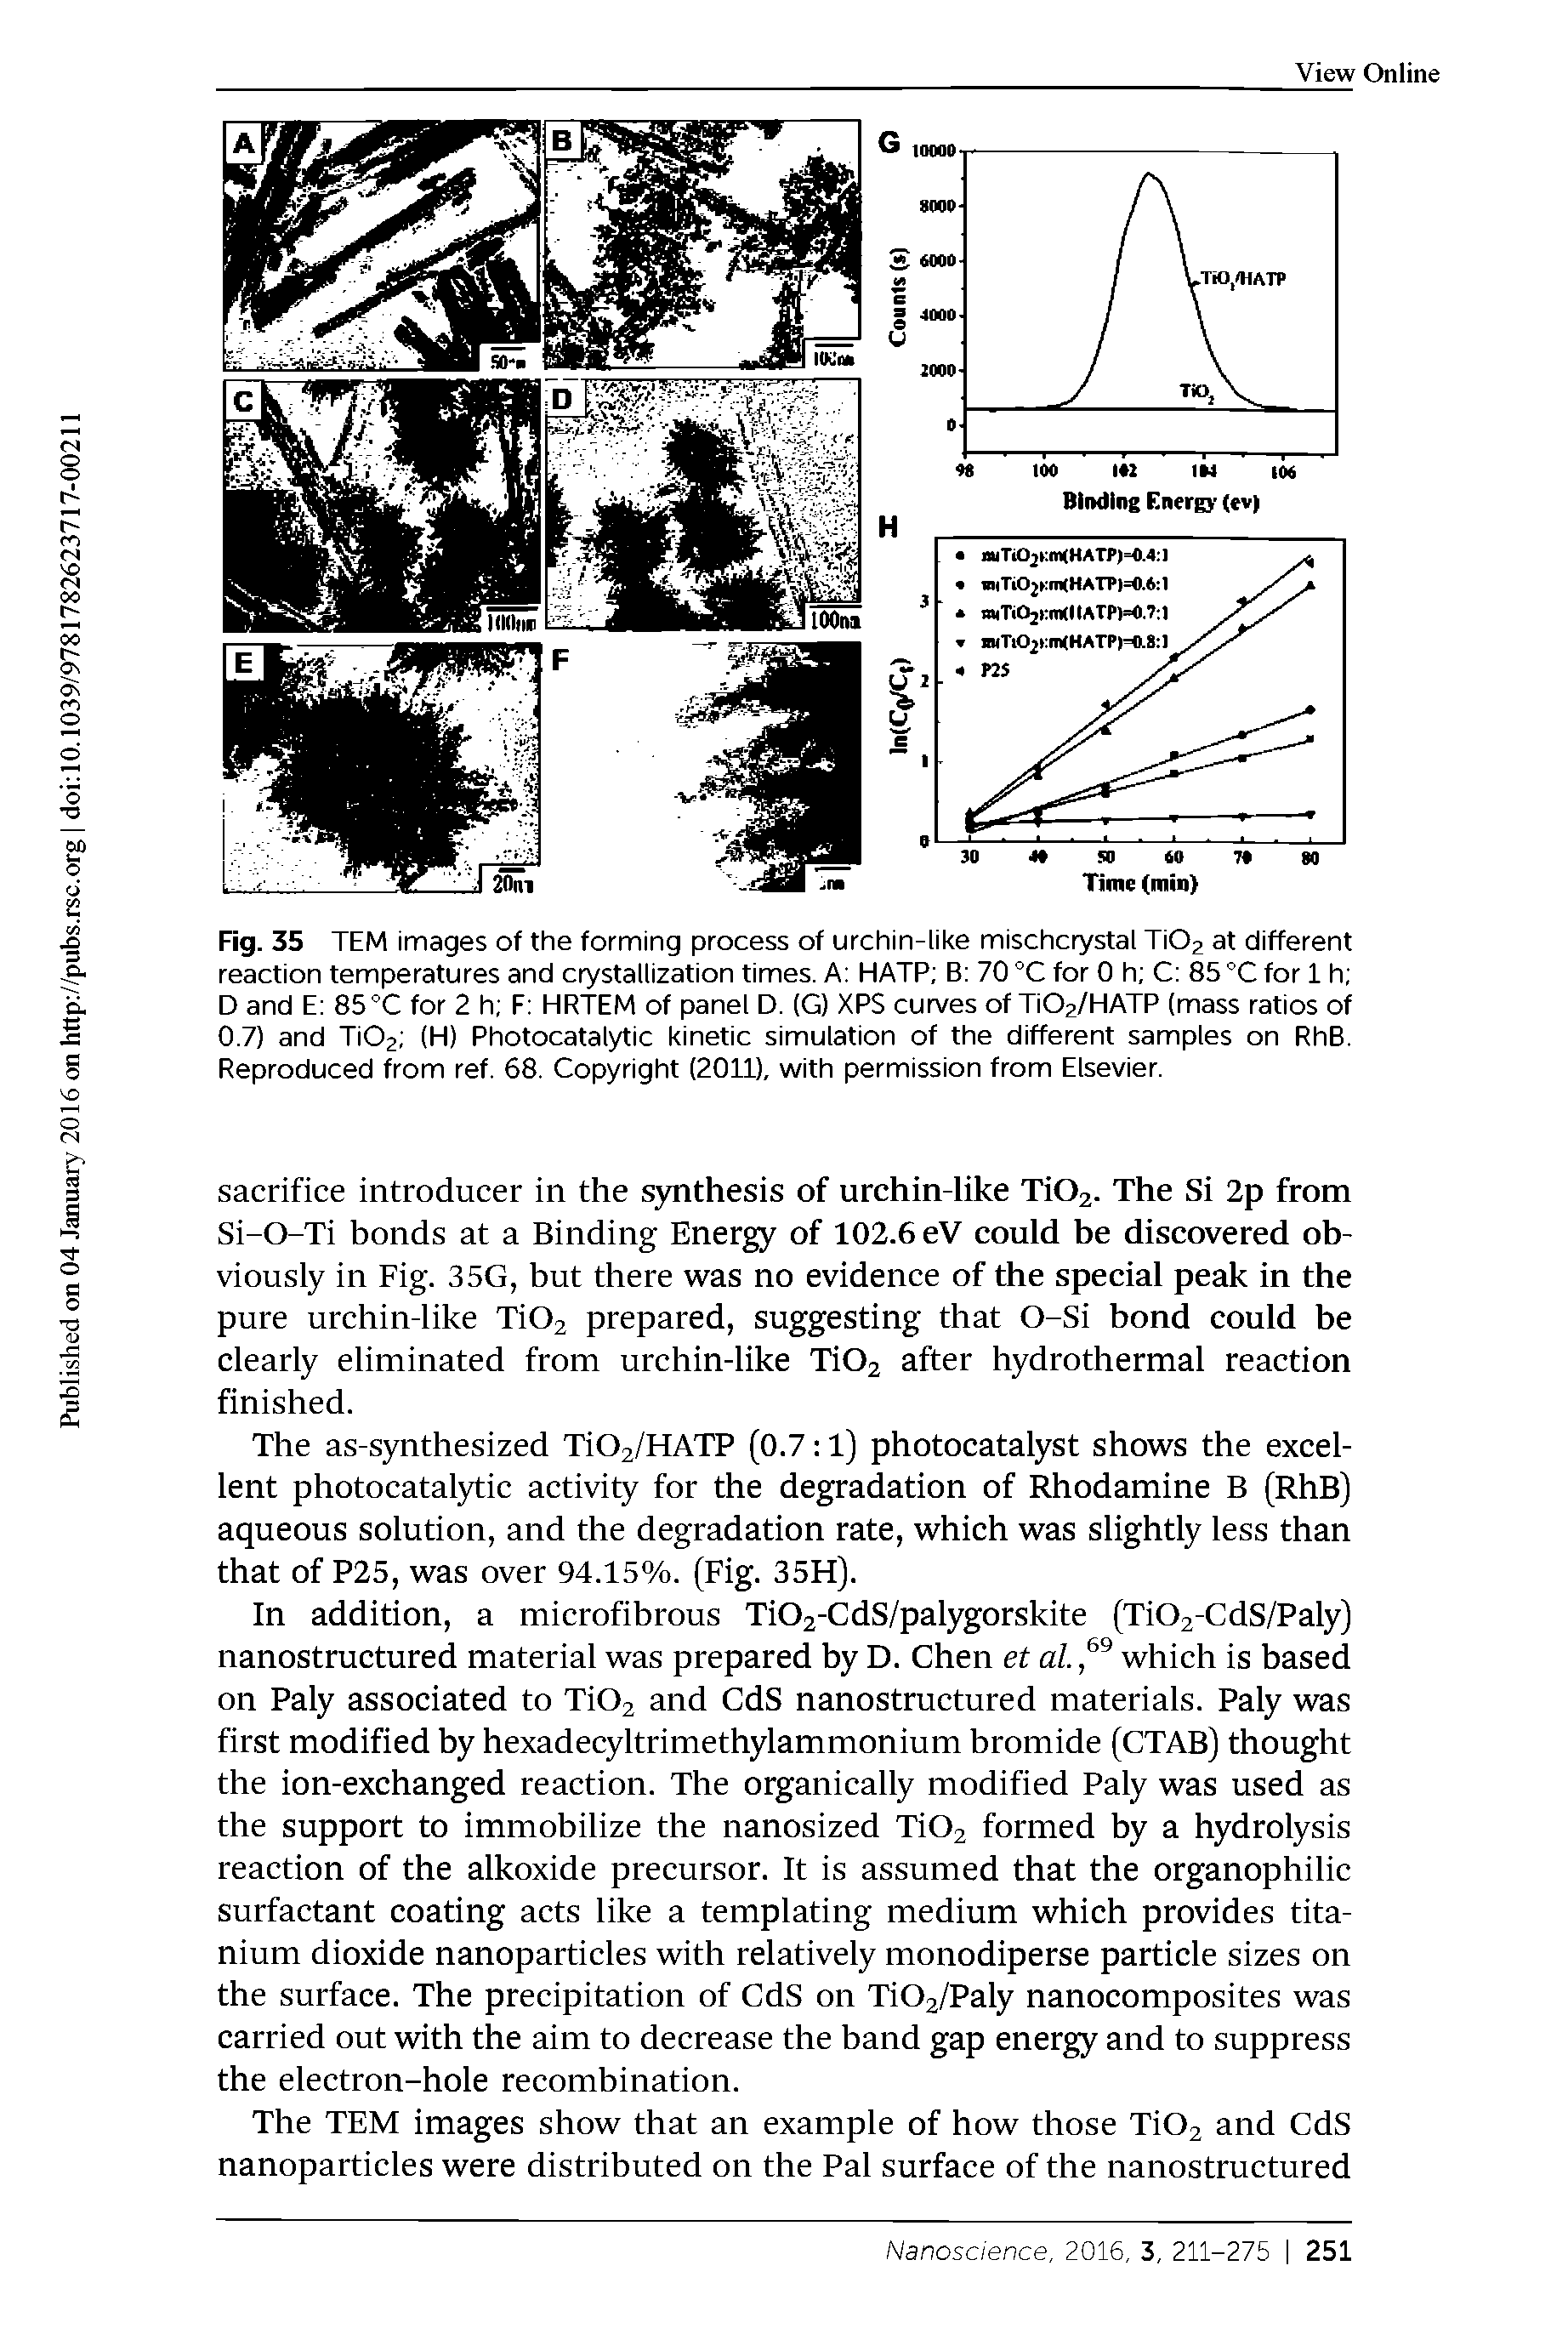 Fig. 35 TEM images of the forming process of urchin-like mischcrystal Ti02 at different reaction temperatures and crystallization times. A HATP B 70 "C for 0 h C 85°C for 1 h, D and E 85°C for 2 h F HRTEM of panel D. (G) XPS curves of Ti02/HATP (mass ratios of 0.7) and Ti02 (H) Photocatalytic kinetic simulation of the different samples on RhB. Reproduced from ref. 68. Copyright (201D, with permission from Elsevier.